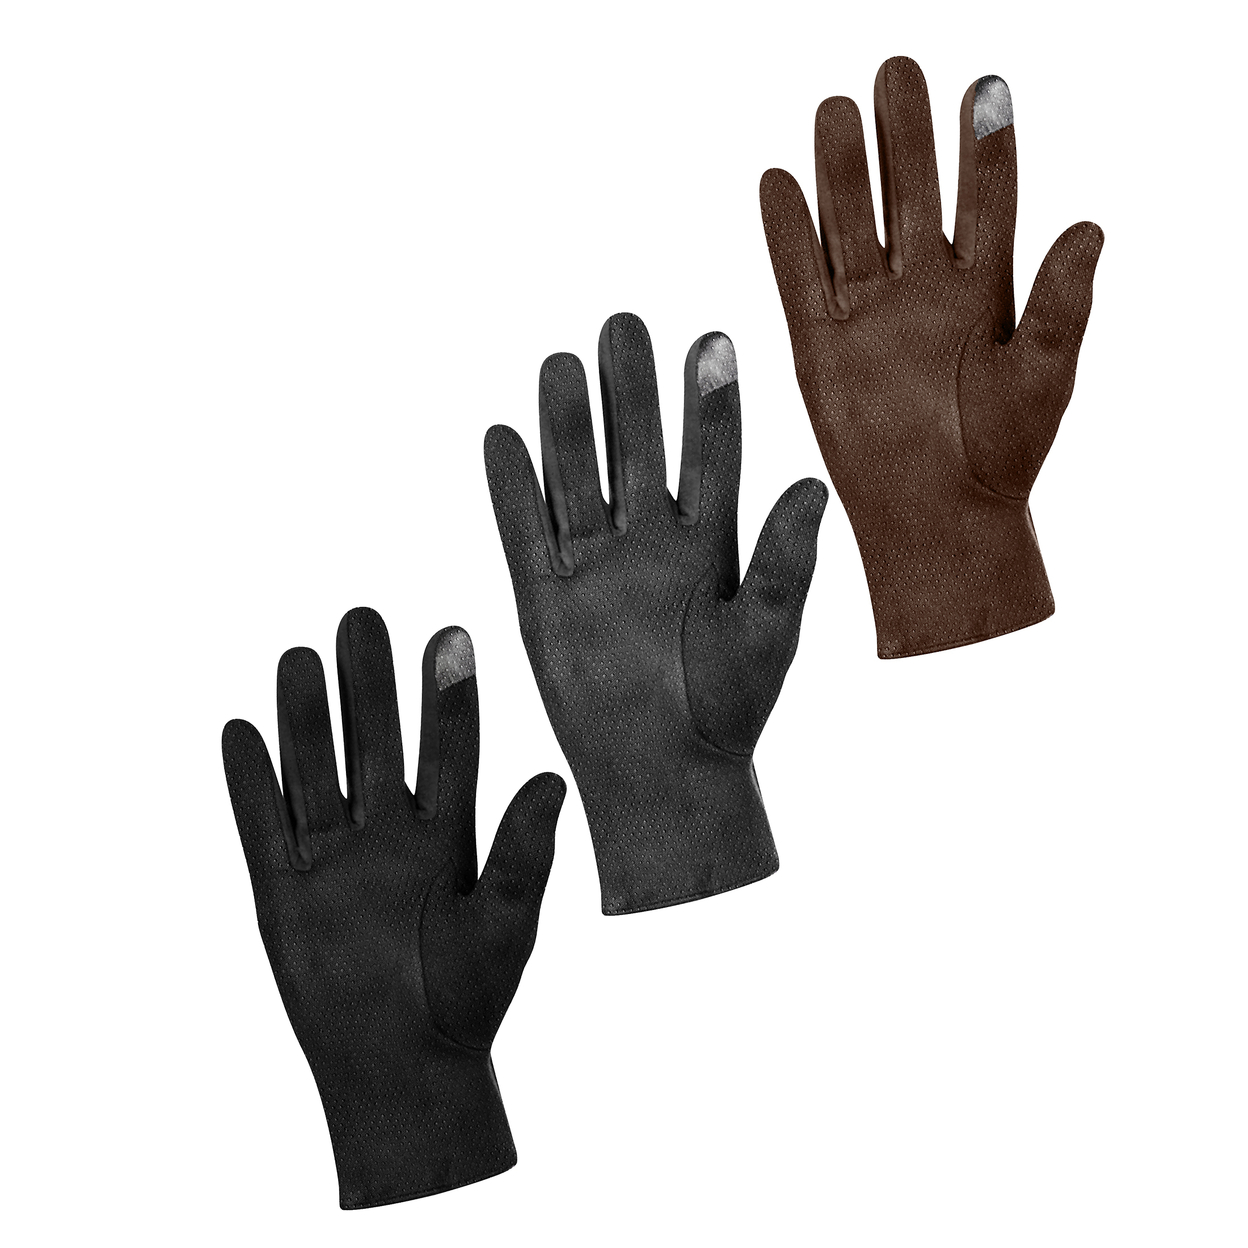 2-Pairs: Winter Warm Soft Lining Weather-Proof Touchscreen Suede Insulated Gloves - Black & Brown